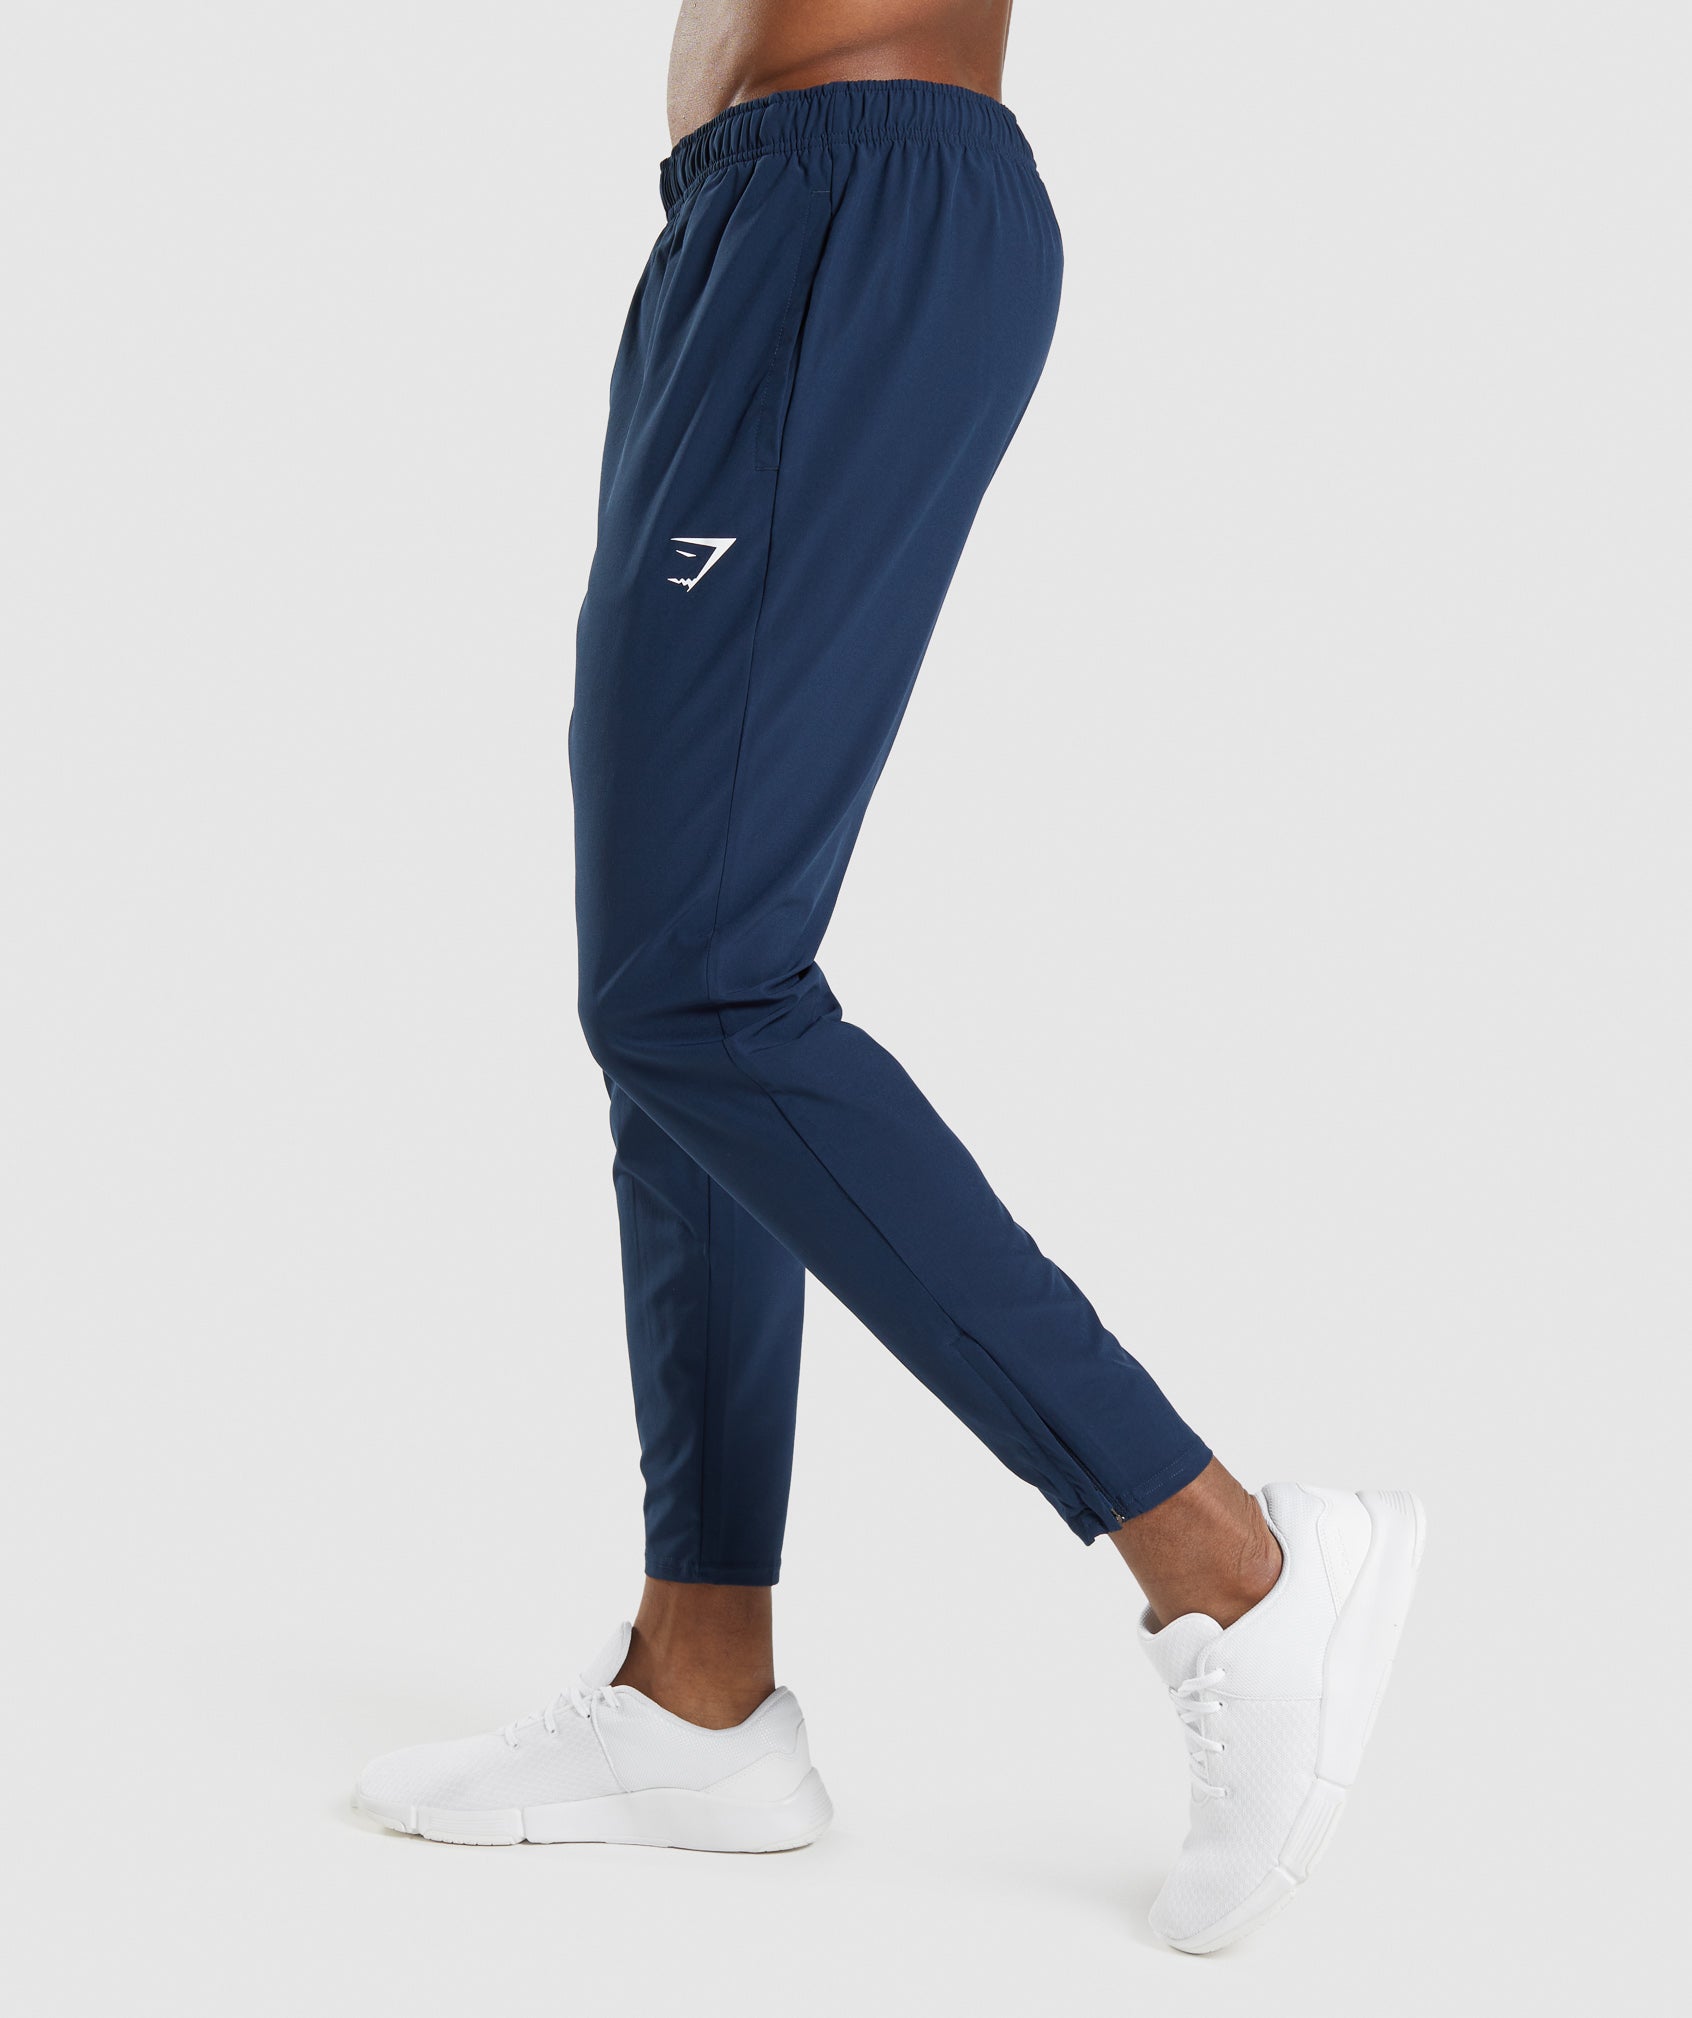 Arrival Woven Joggers in Navy - view 3